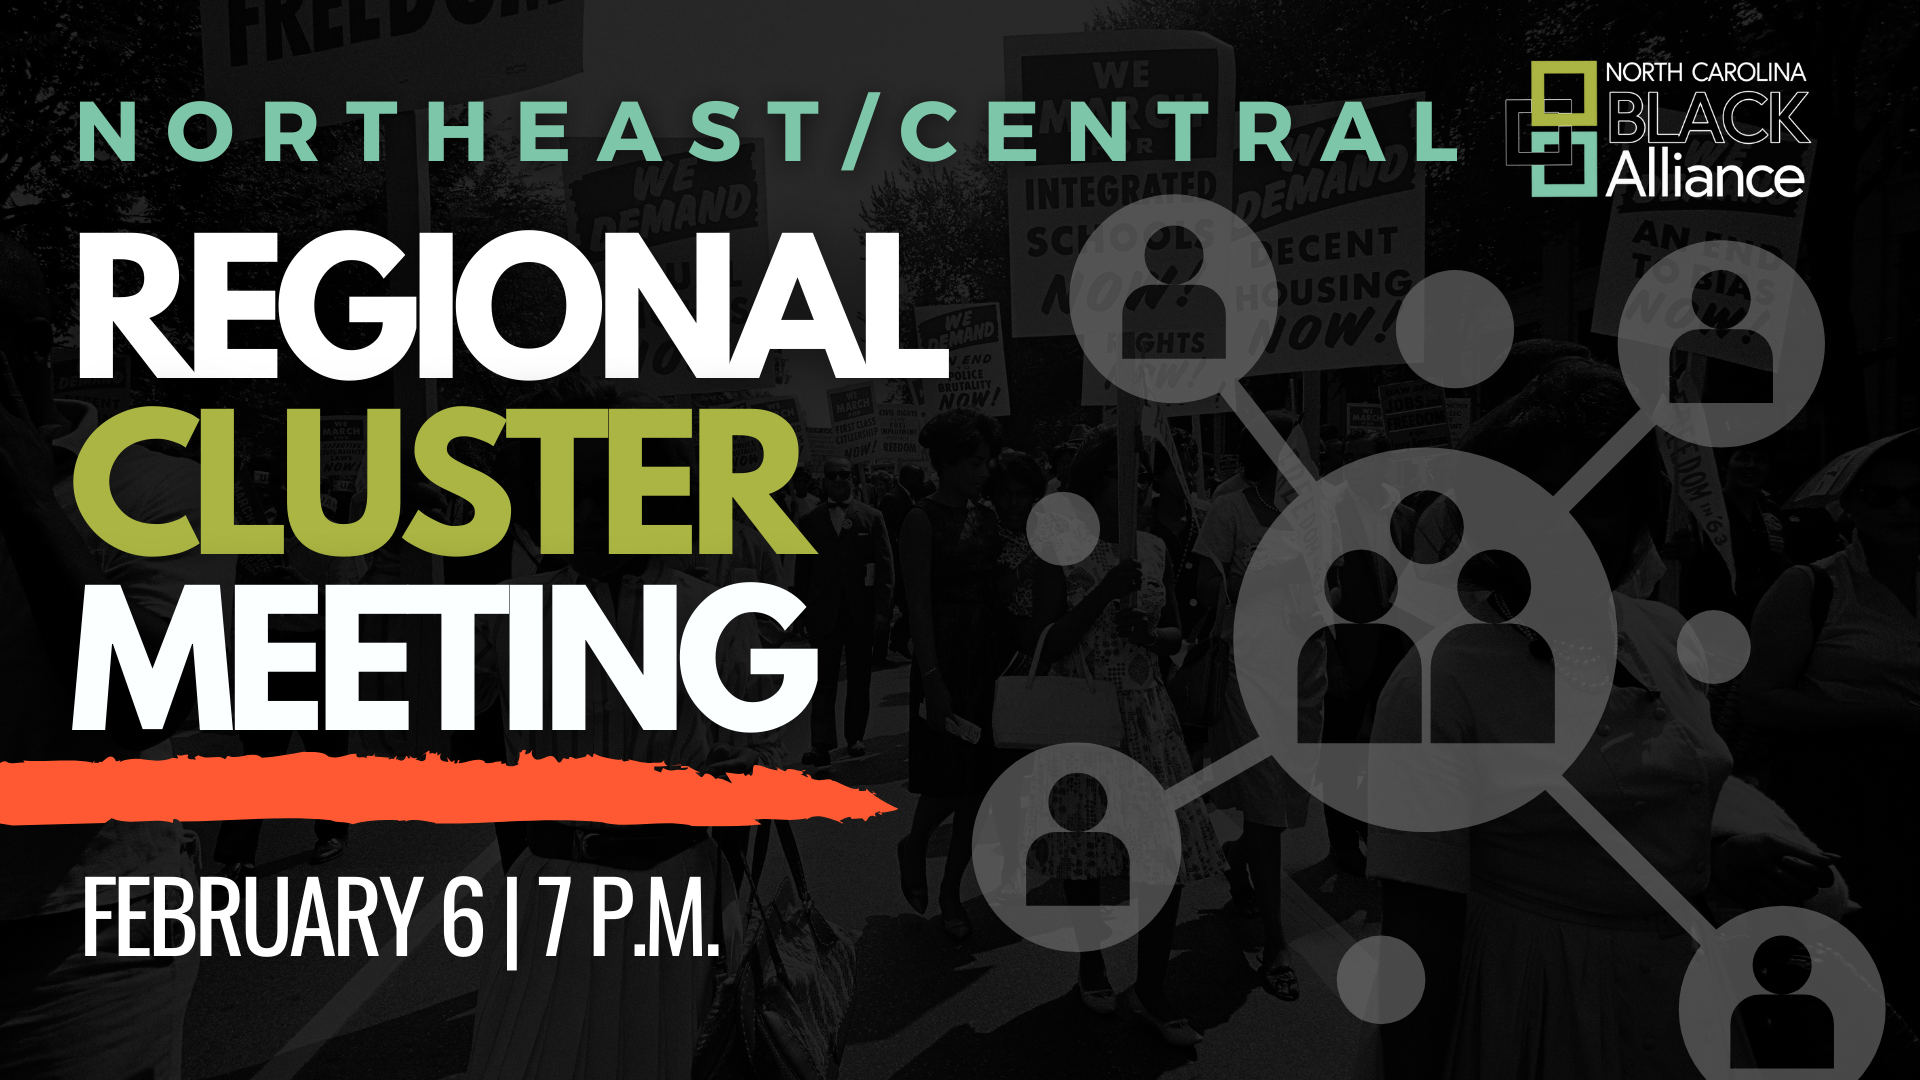 Northest/Central Regional Cluster Meeting on February 6th.